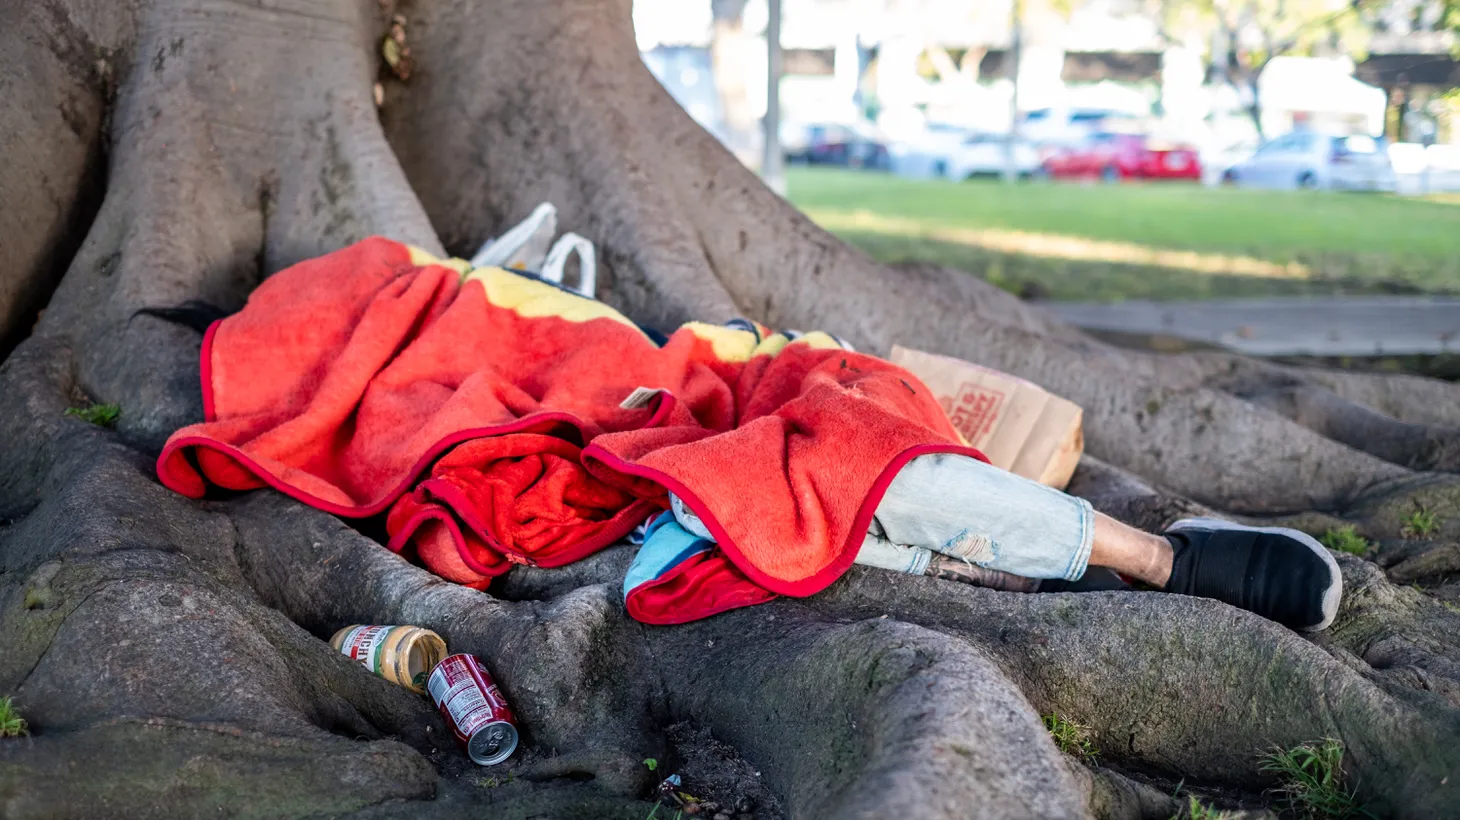 An unhoused person lies covered in a blanket under a tree in downtown Culver City, Feb. 25, 2022.